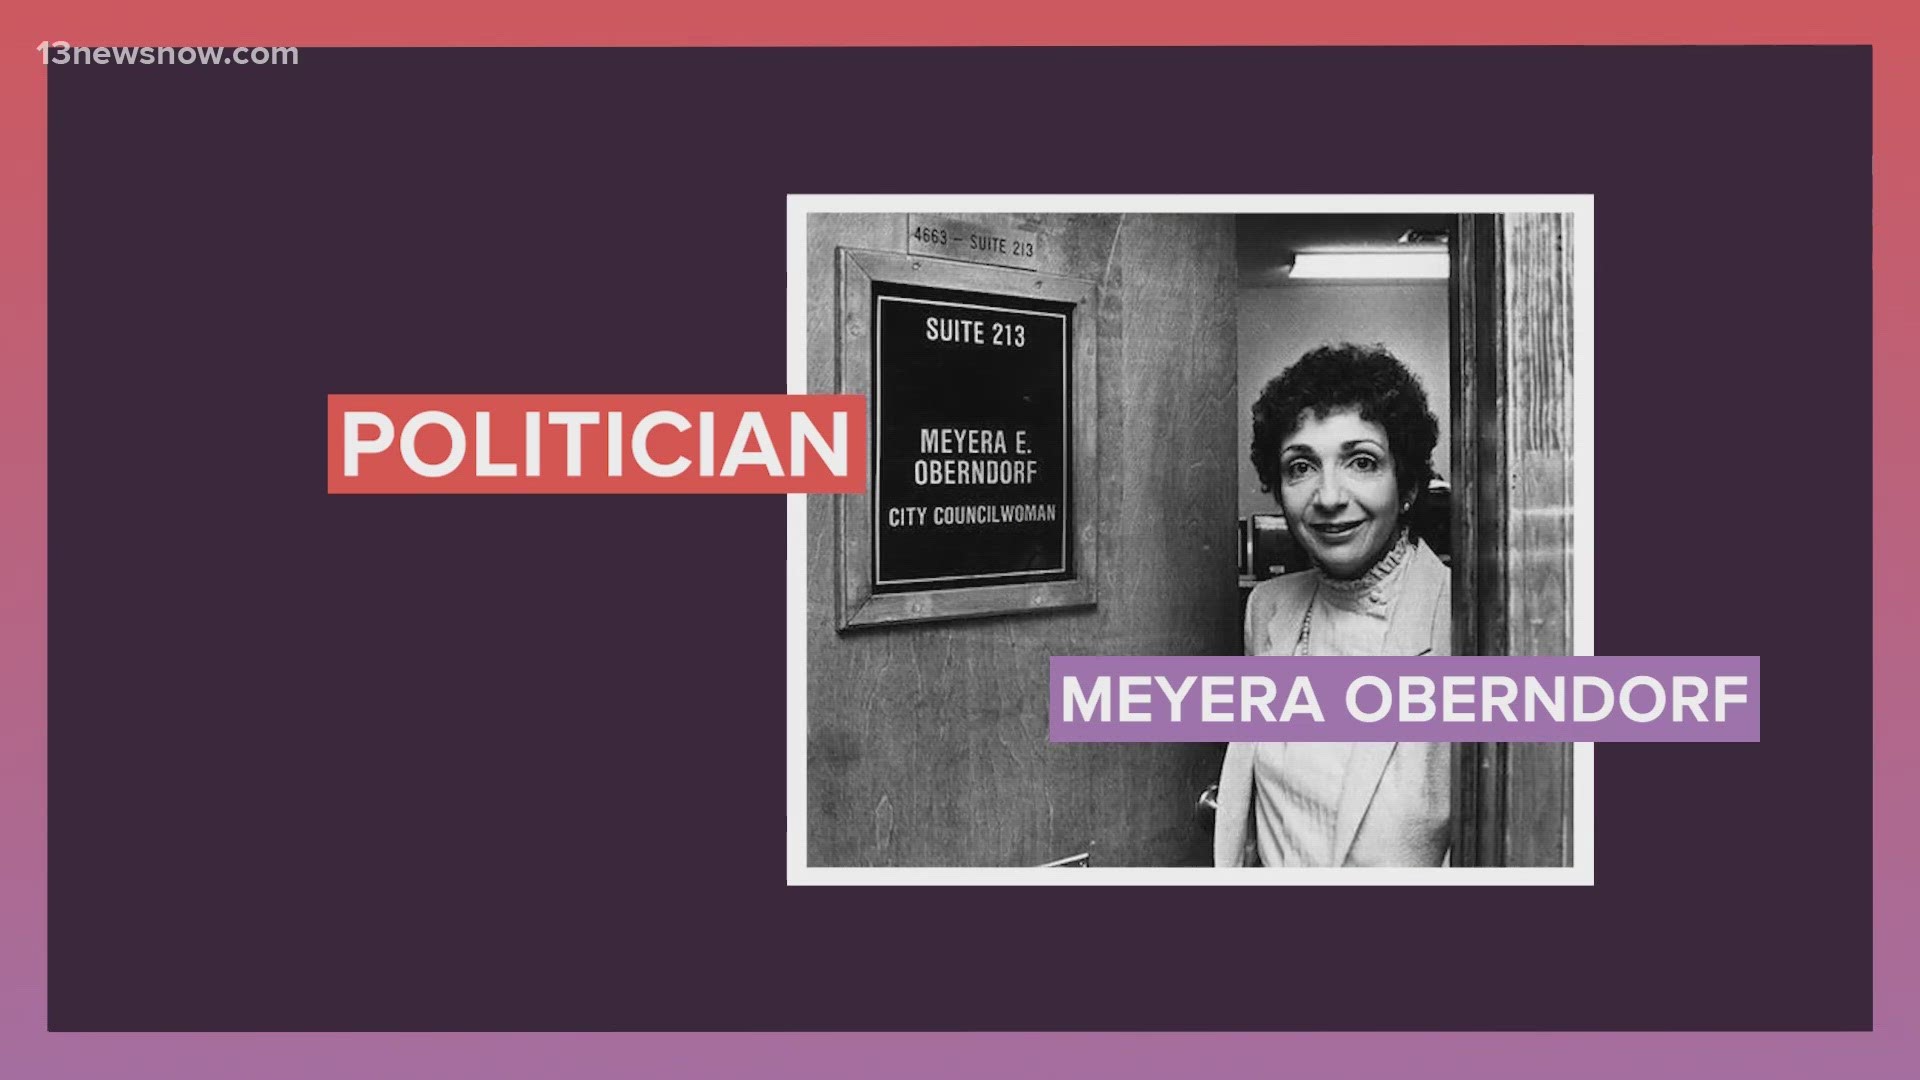 You've probably heard of her name or been to the Virginia Beach library that bears her name. But, what do you know of Meyera Oberndorf?